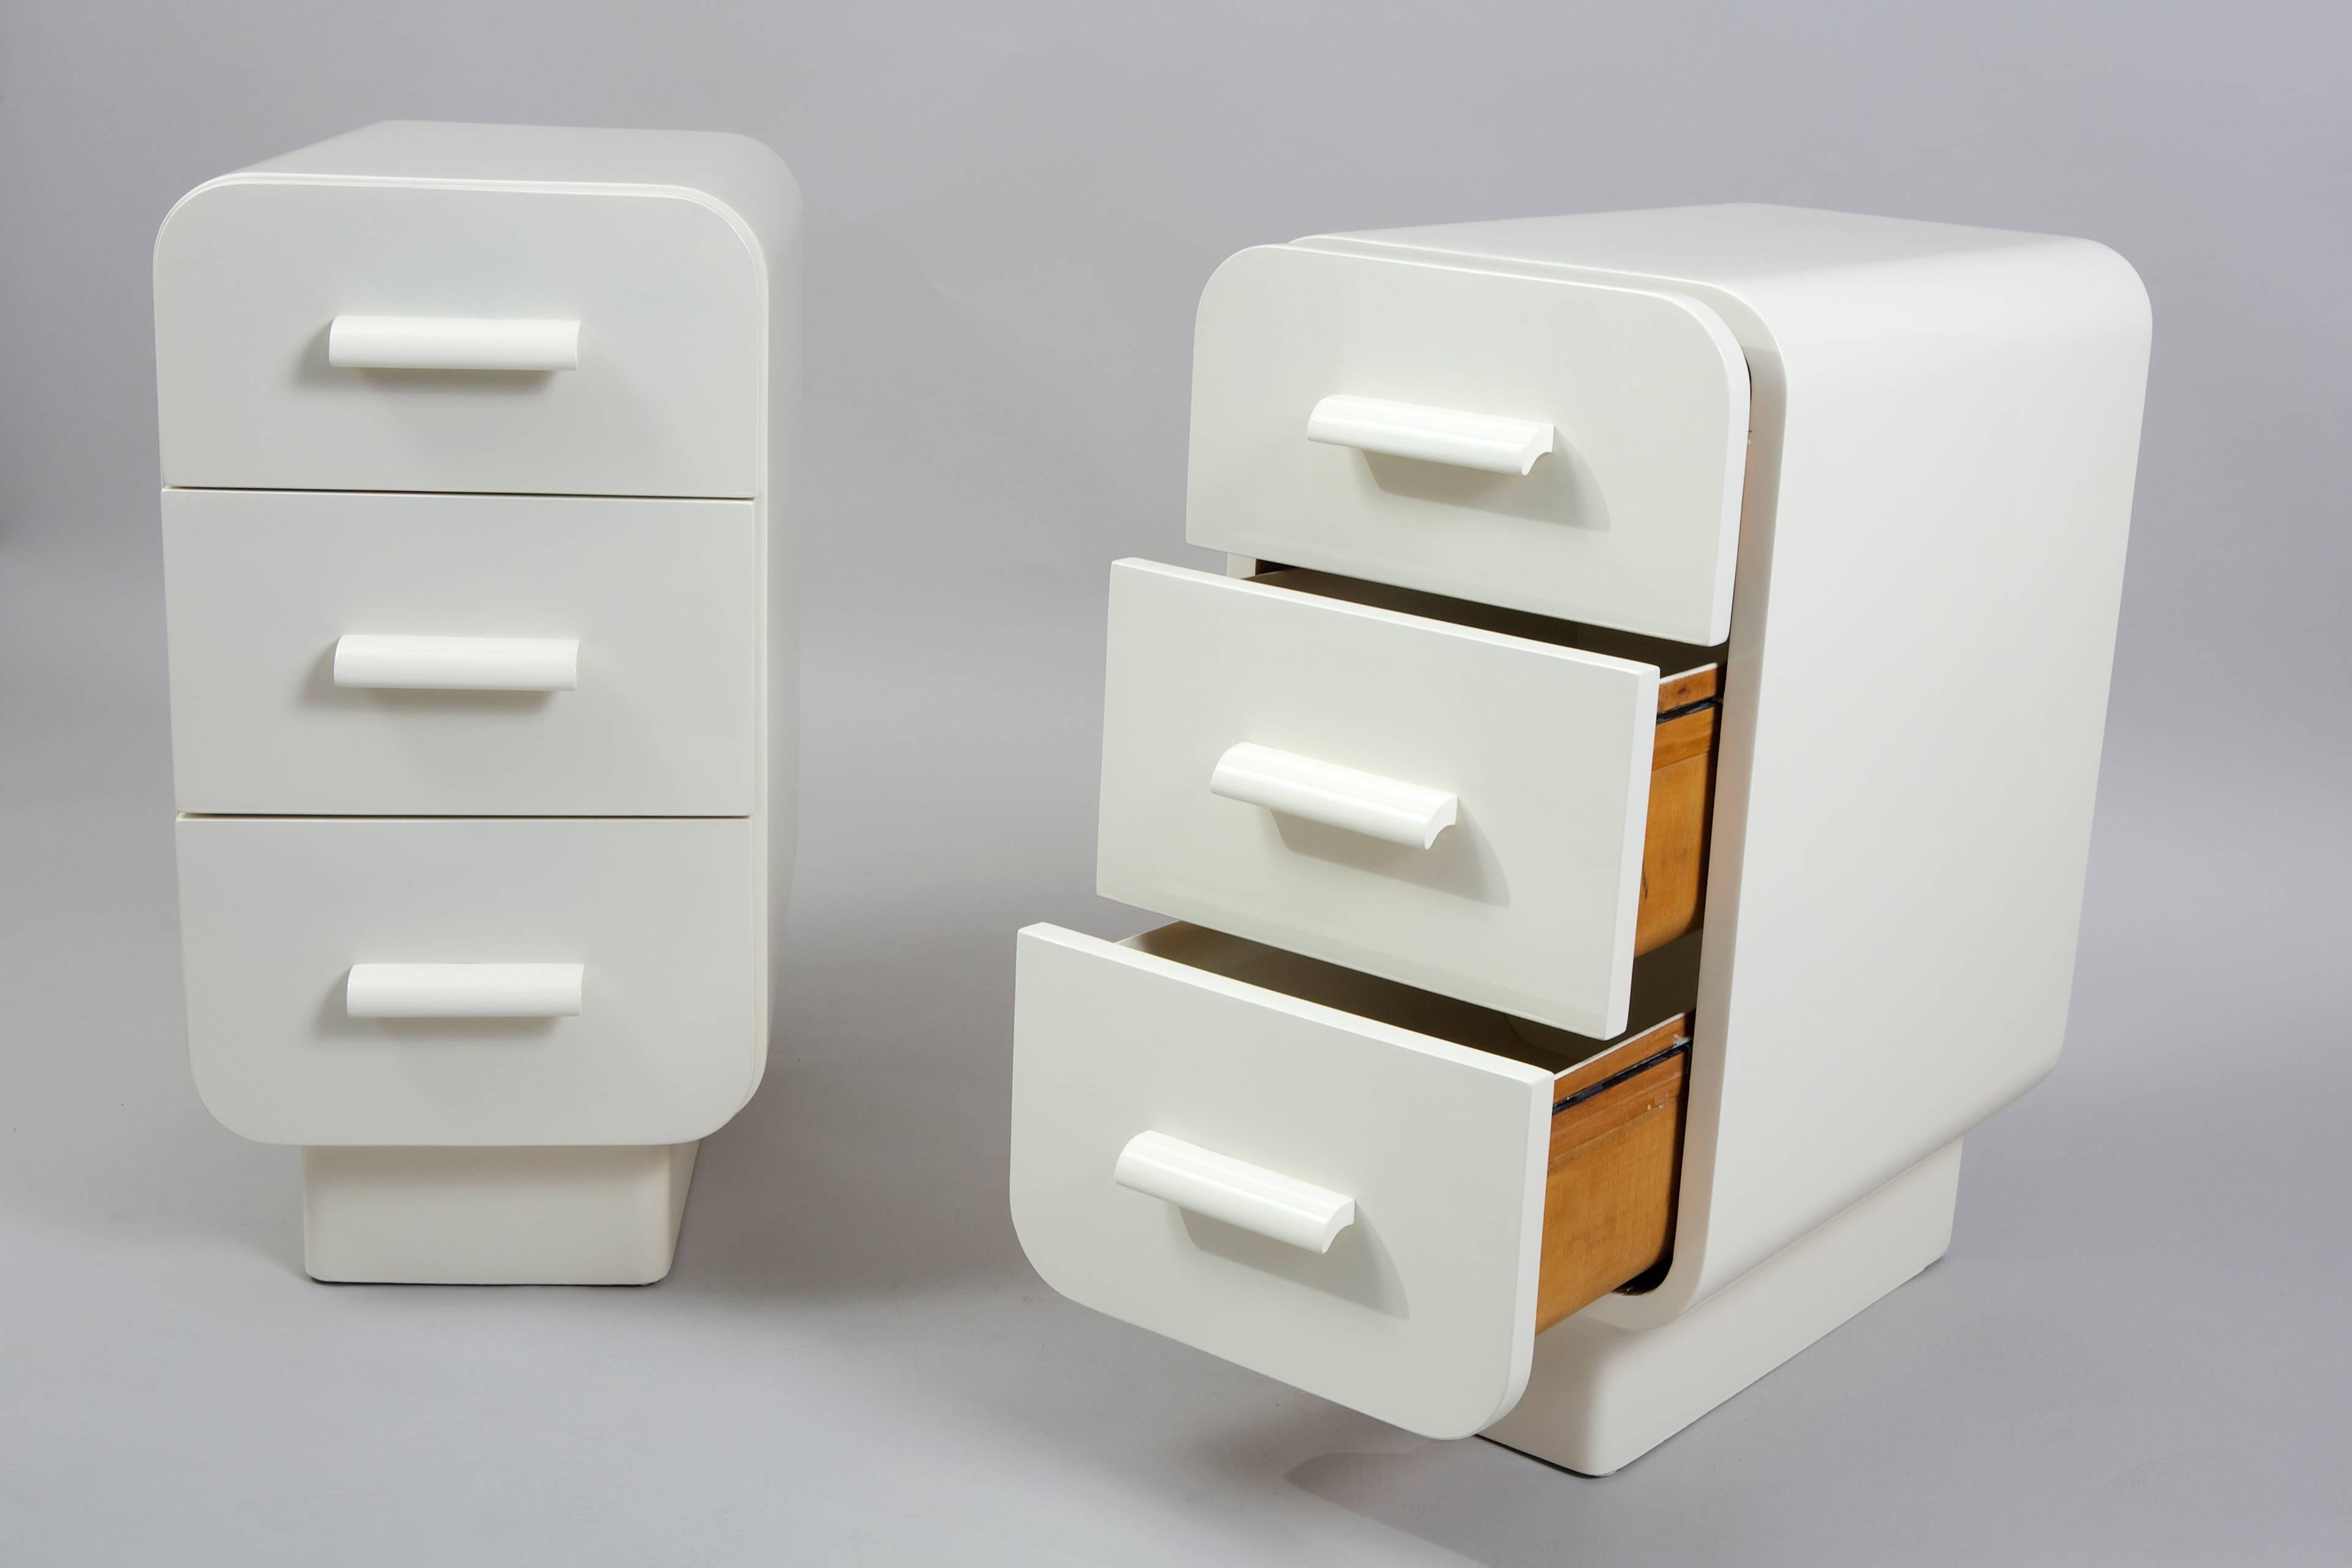 Czech Pair of White Art Deco Bed-Side Tables, Jindrich Halabala